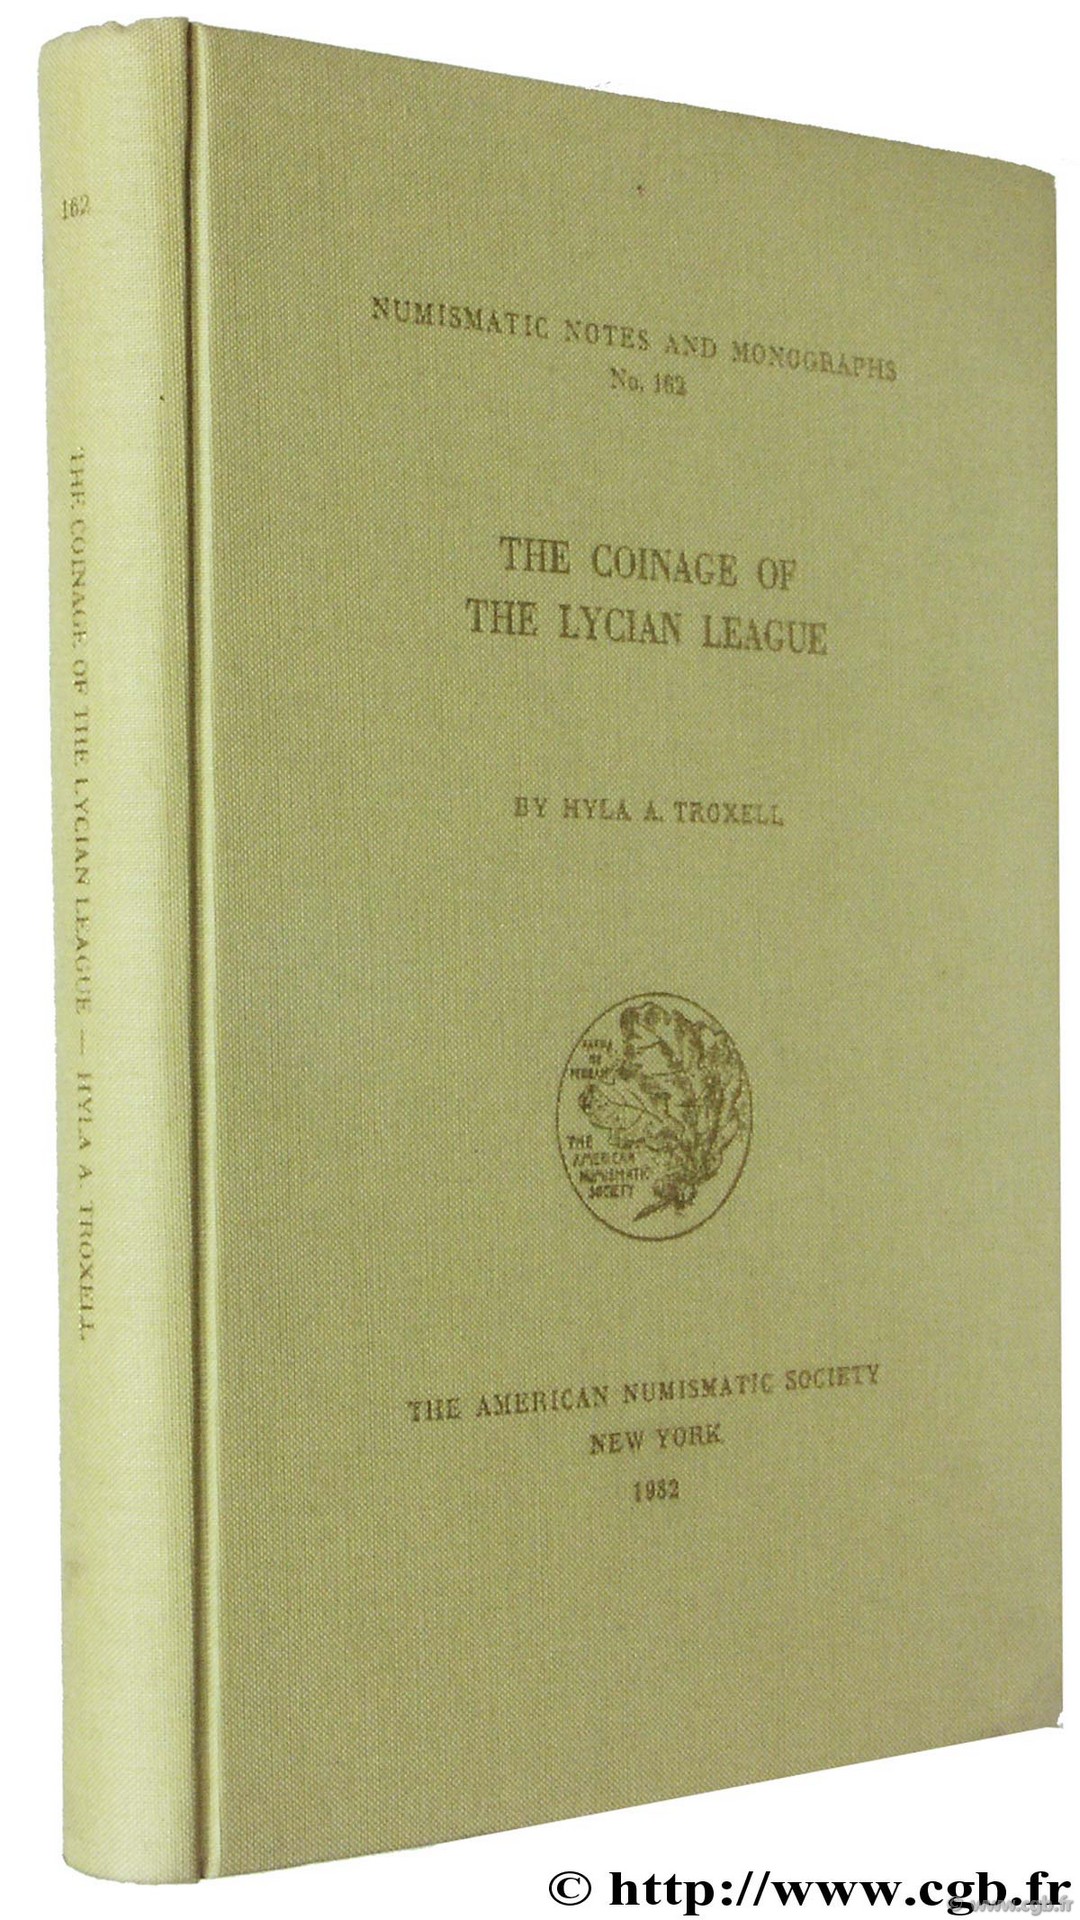 The Coinage of the Lycian League, NNM n° 162 TROXELL H.-A. 